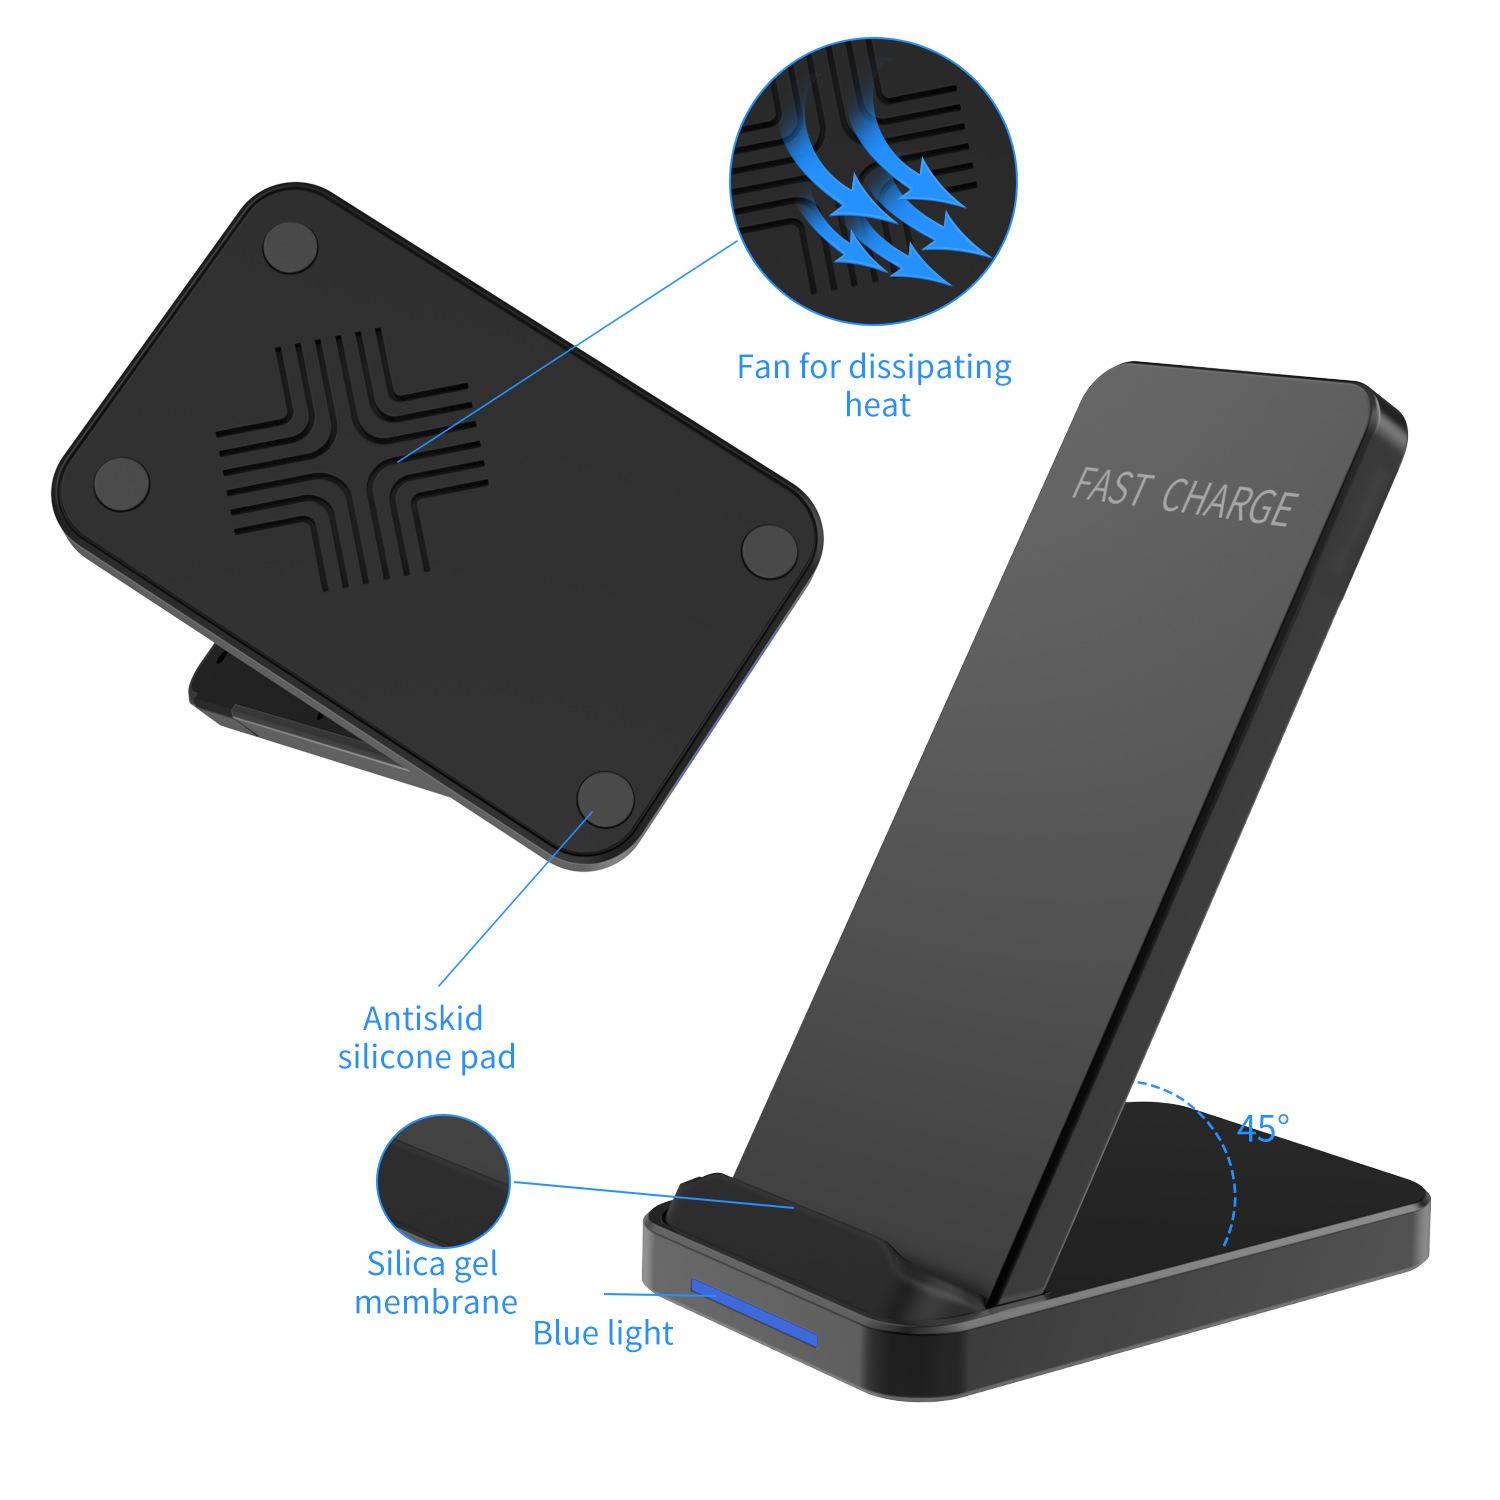 DAZ Magnetic Phone 2 in1 Wireless Charger Magnet Custom Wirelss Charger Station Phone Mount Wireless Charging Stand For Iphone